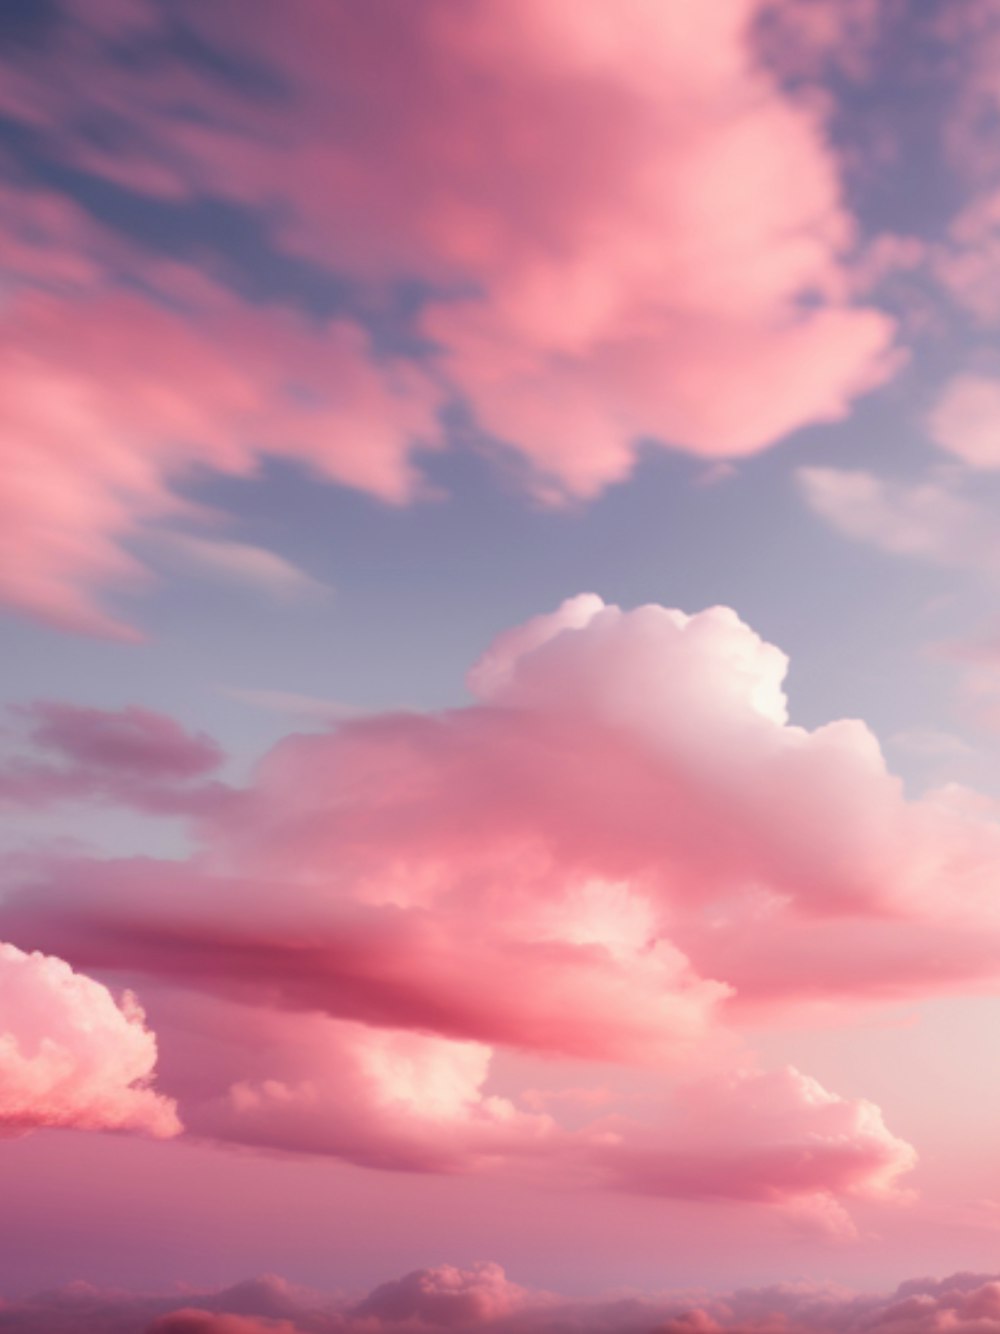 a pink cloud filled sky with a plane flying in the distance